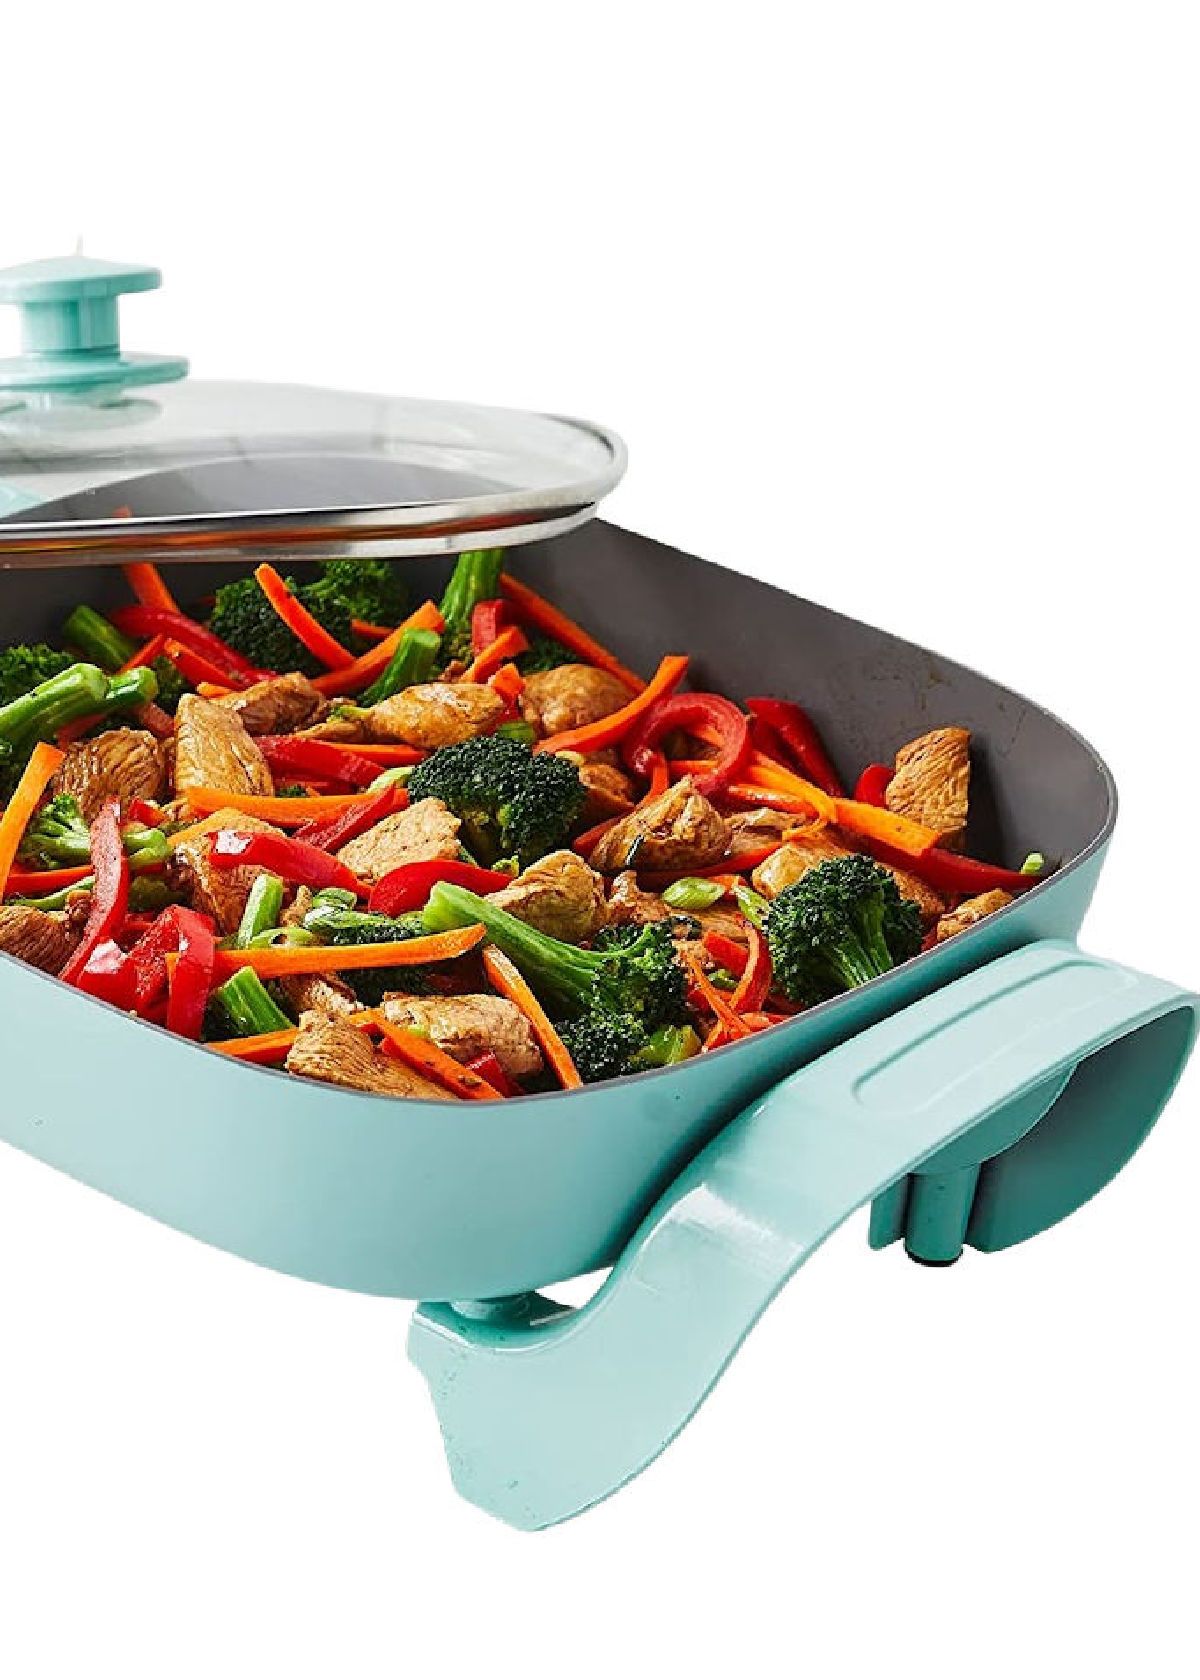 Large Electric Skillet: Our Top 5 Picks